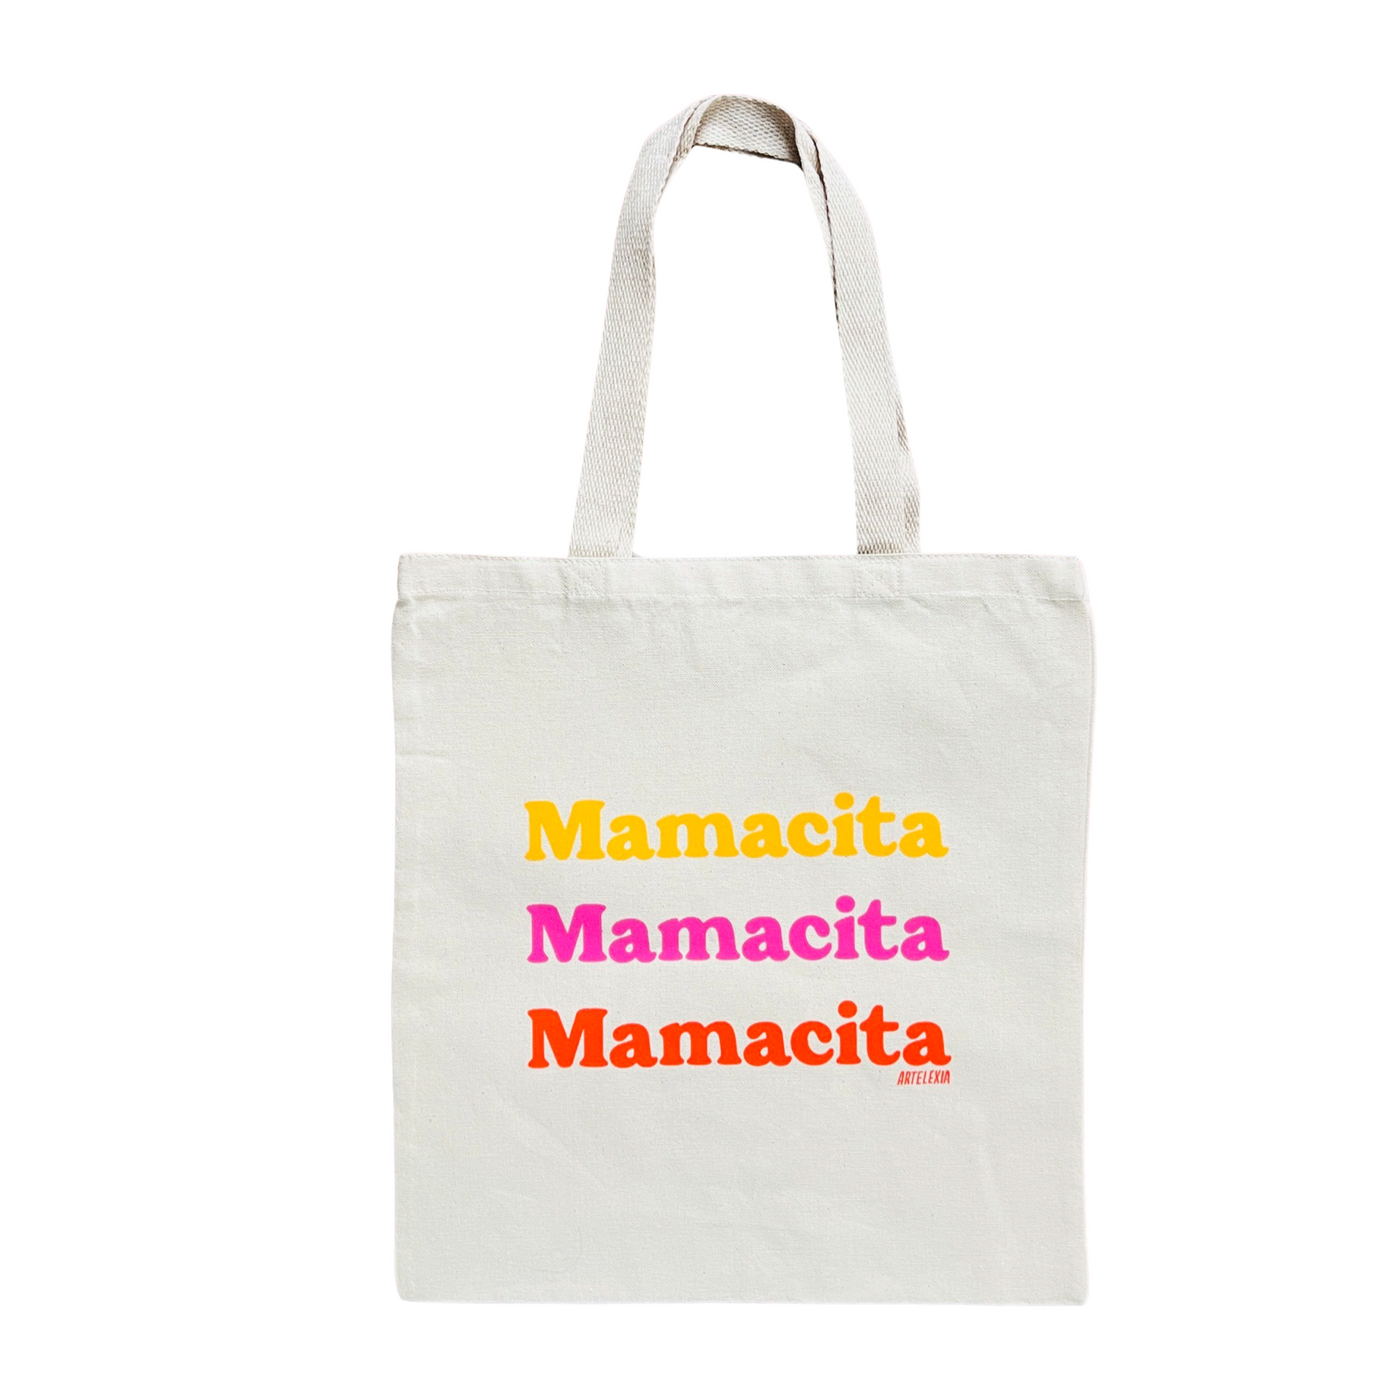  Natural canvas tote bag with the word Mamacita repeated three times in the colors yellow, pink, orange.